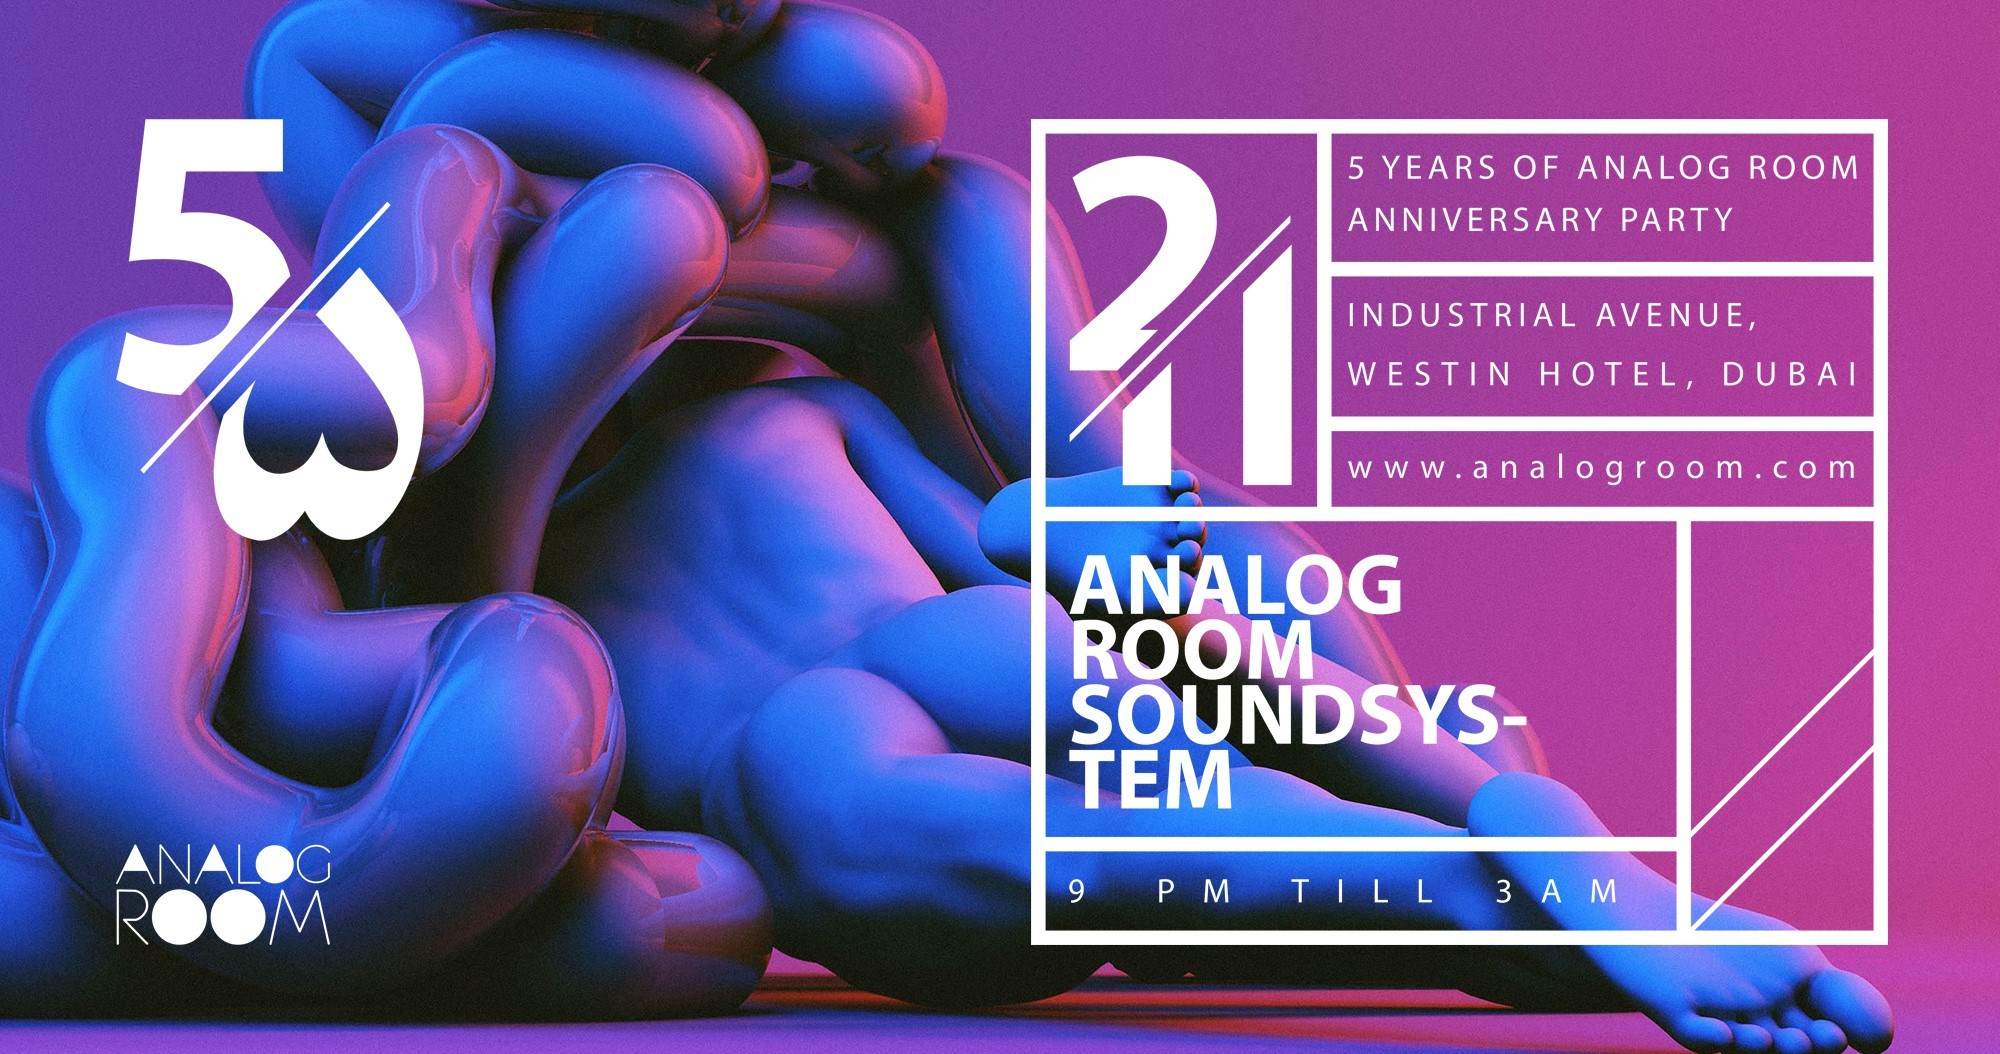 5 Years of Analog Room Anniversary Party - Página frontal